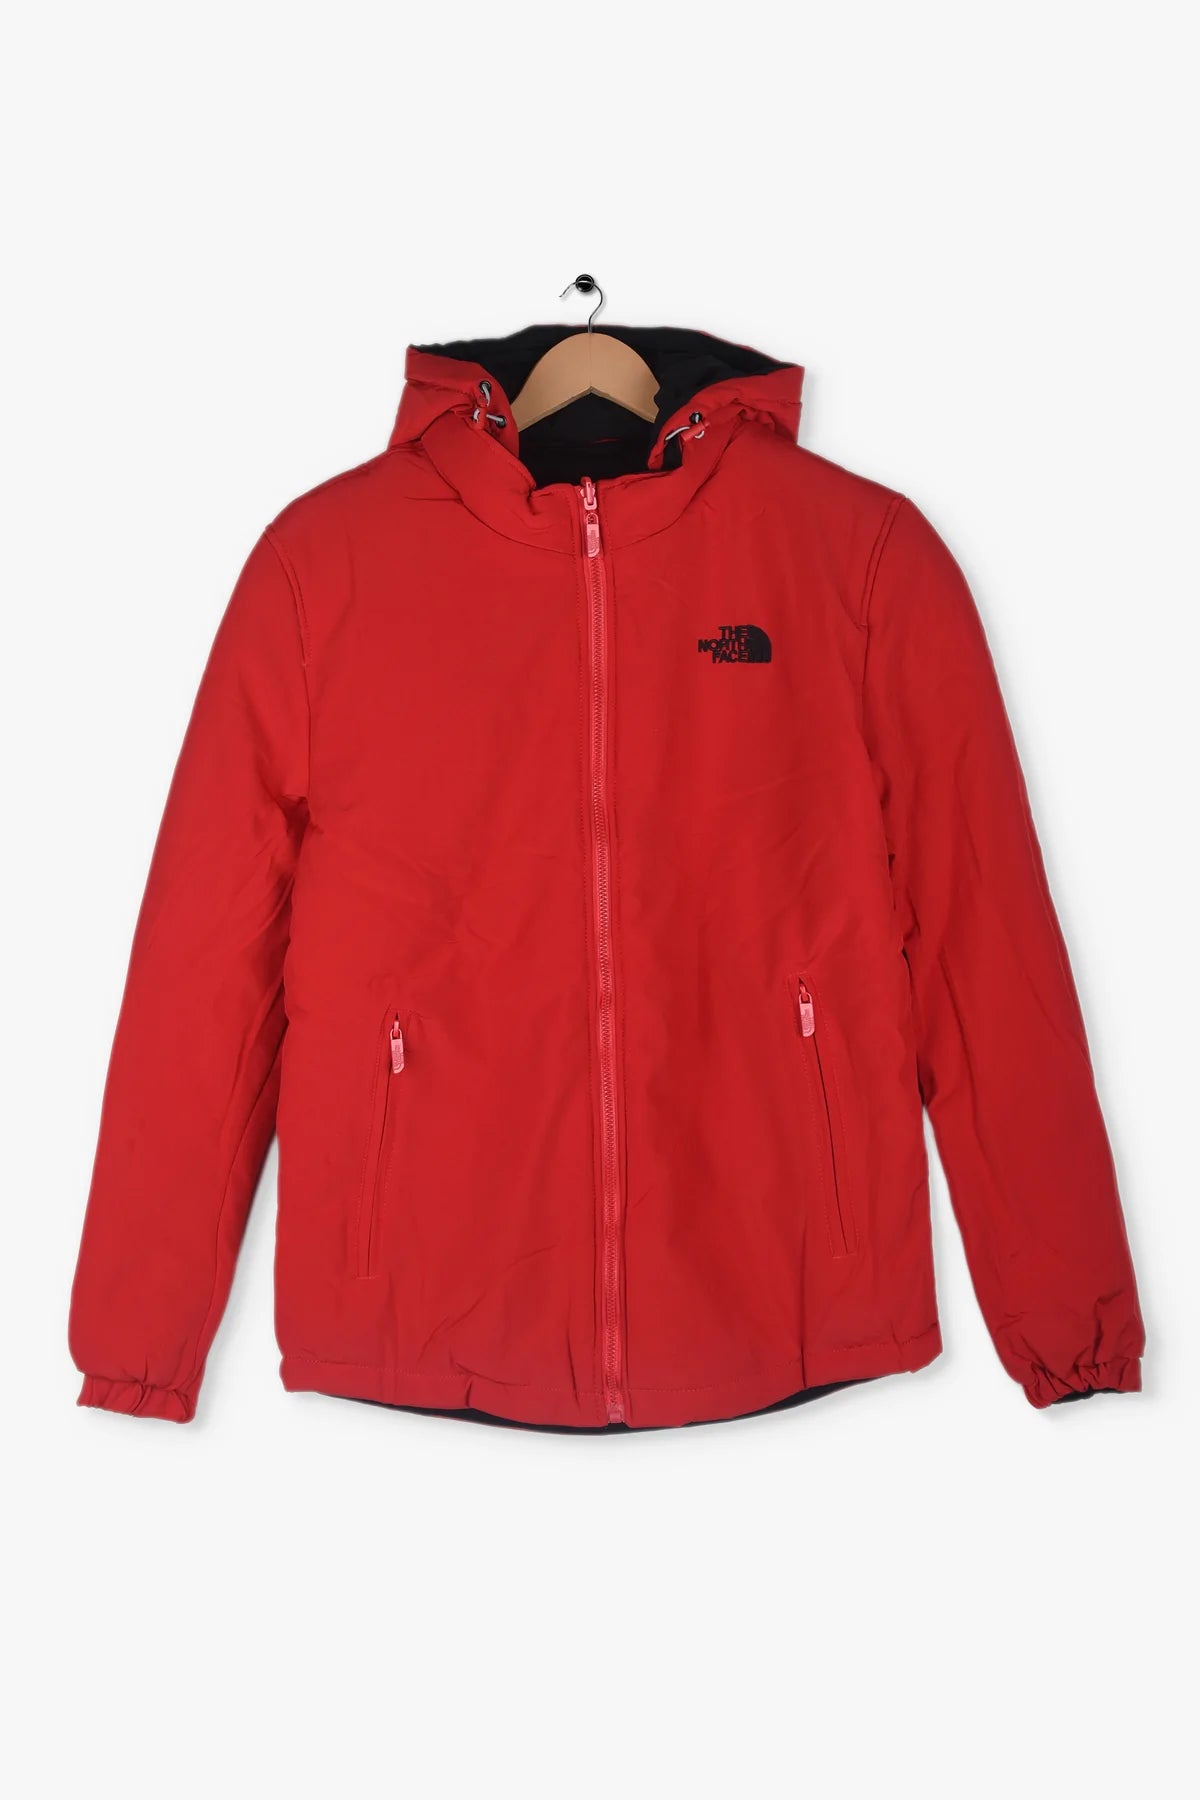 NRTH FC Reversible Red Imported Jacket (00266)